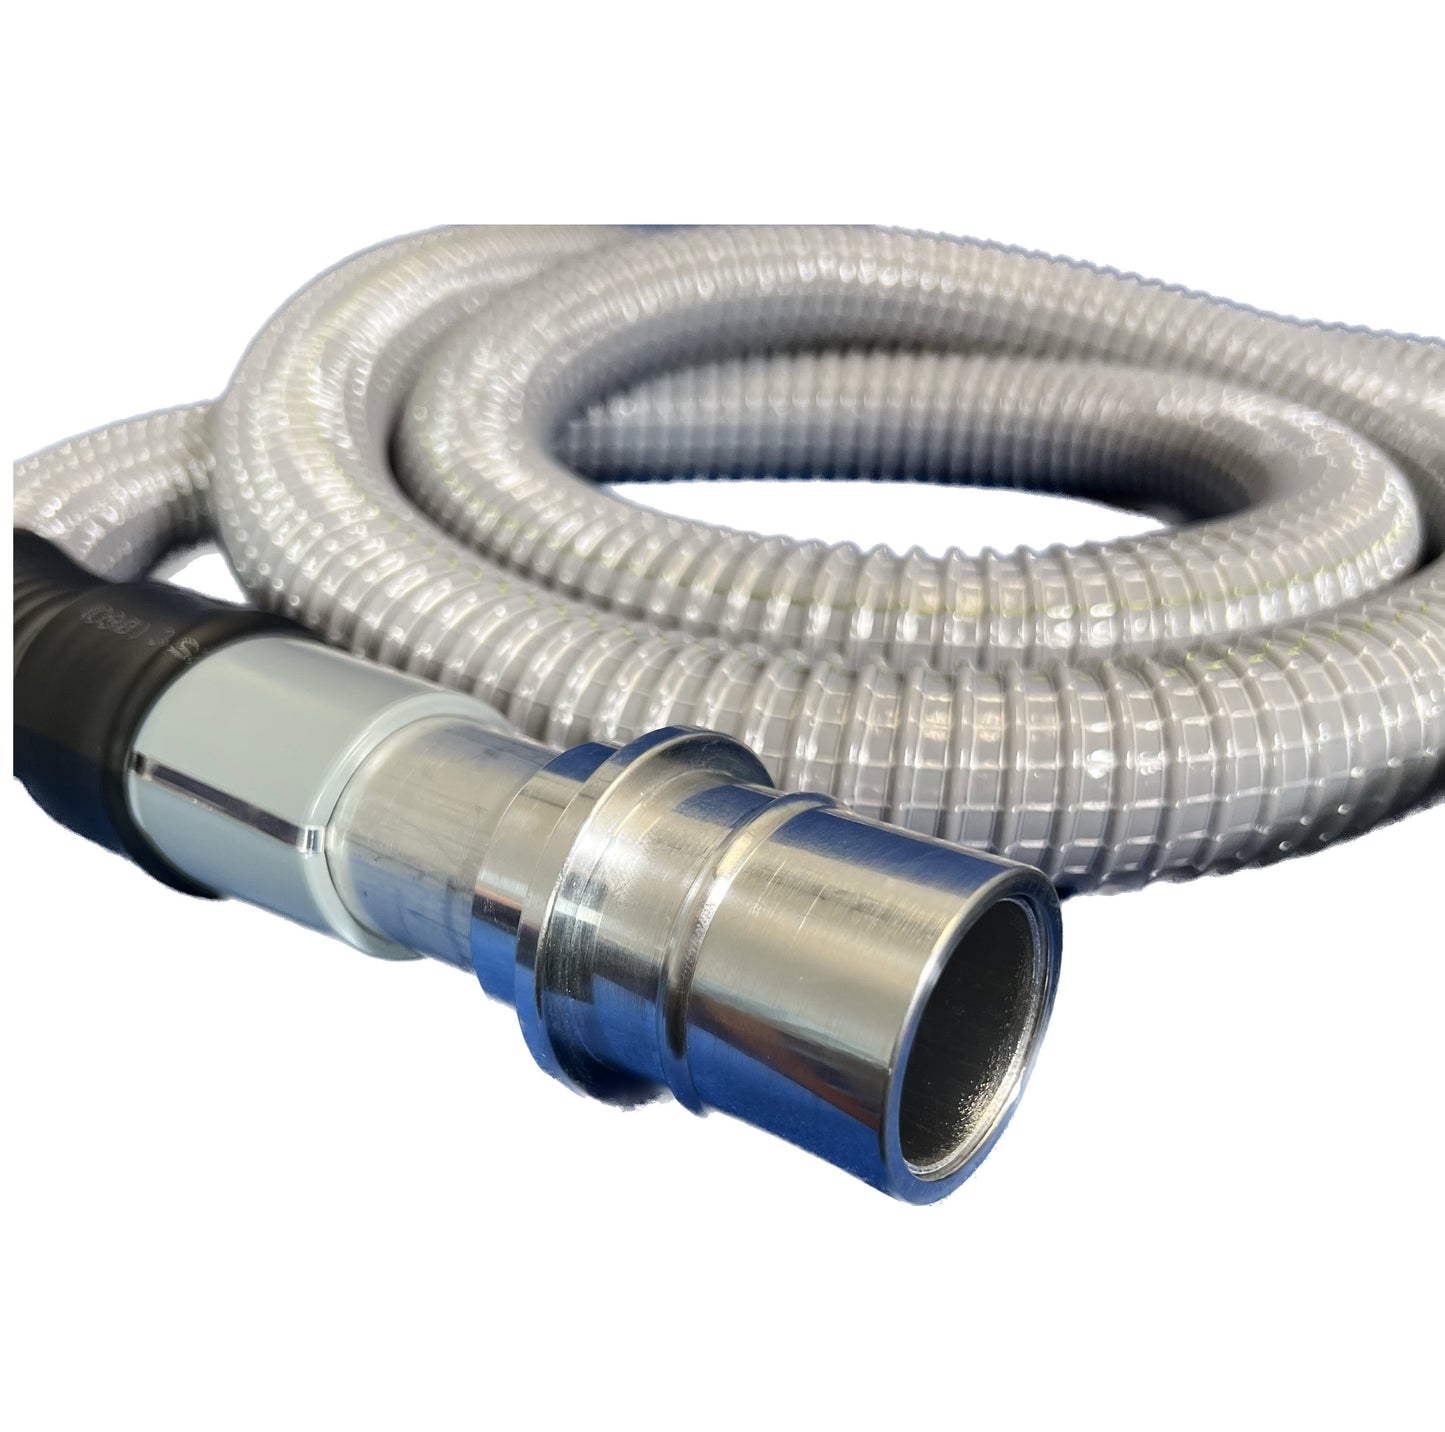 1-1/2" Flexible Plastic Grounded Vacuum Hose with Cuffs, Flexaust Dayflex® Flex-Vac® PVC Hose, Gray Color, 10', 15', 25' and 50' Lengths Available, Fits Latching and Non-Latching Inlet Valves